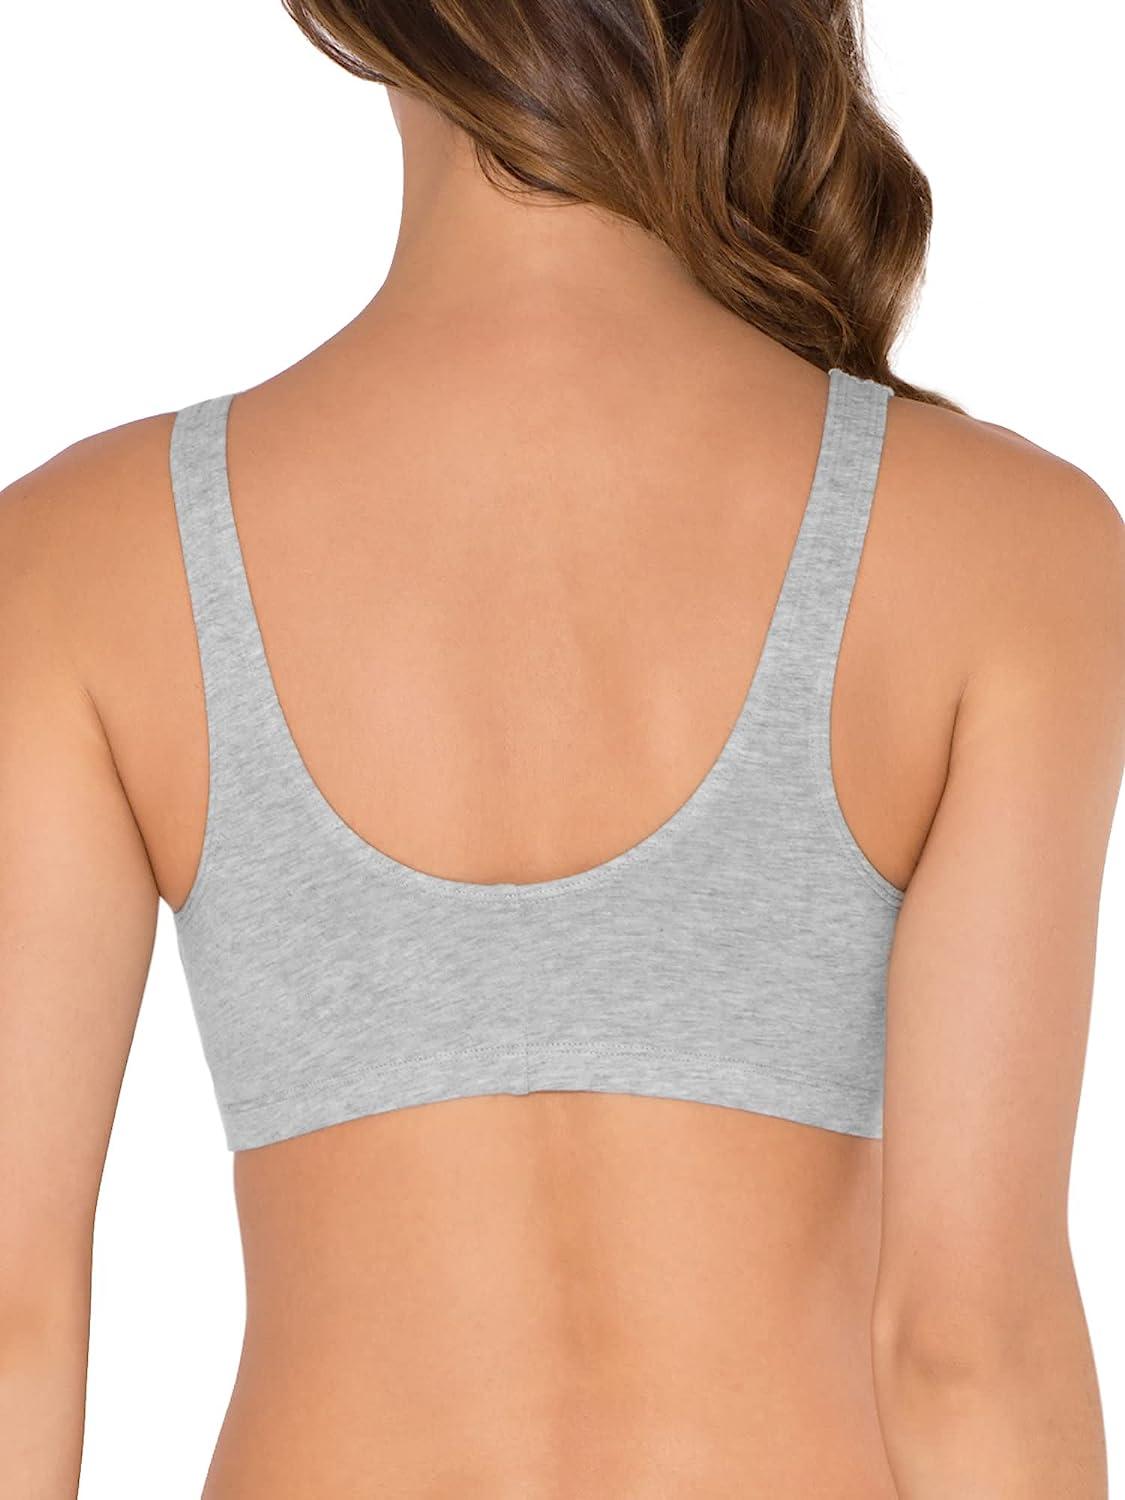 Fruit of the Loom Women's Cotton Sports Bra, 3-Pack, Style-9036